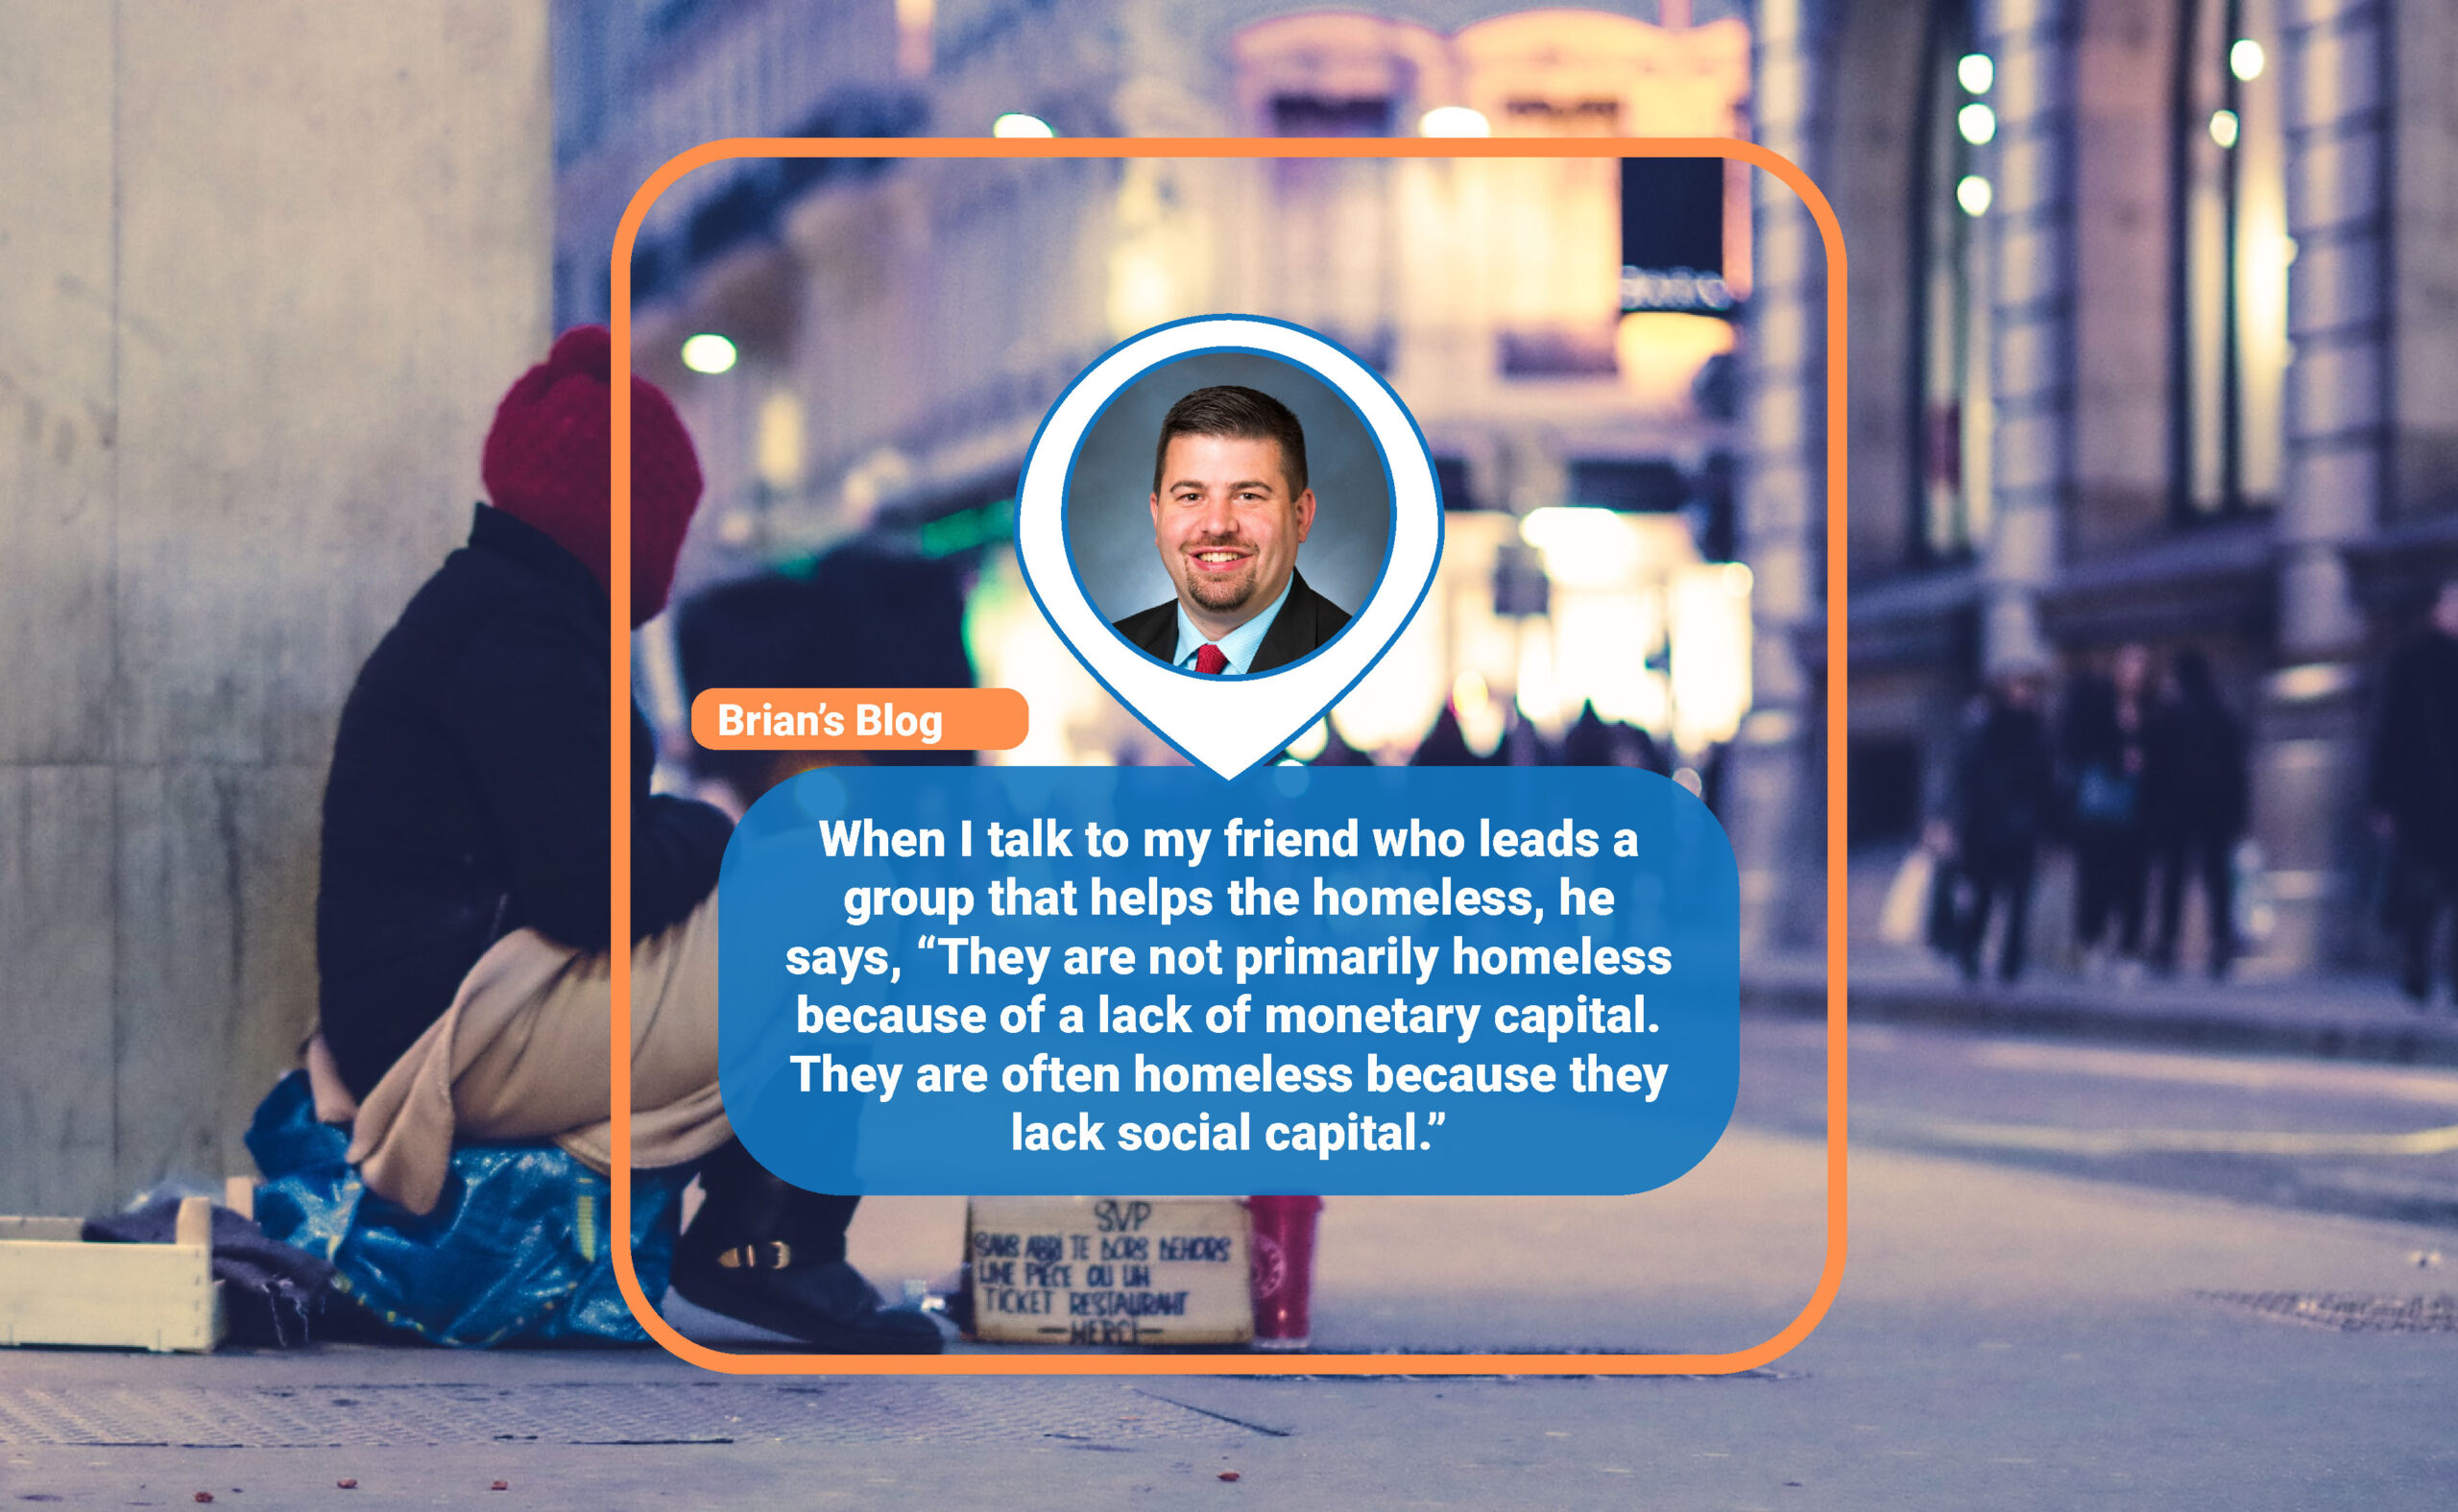 When I talk to my friend who leads a group that helps the homeless, he says, “They are not primarily homeless because of a lack of monetary capital. They are often homeless because they lack social capital.”